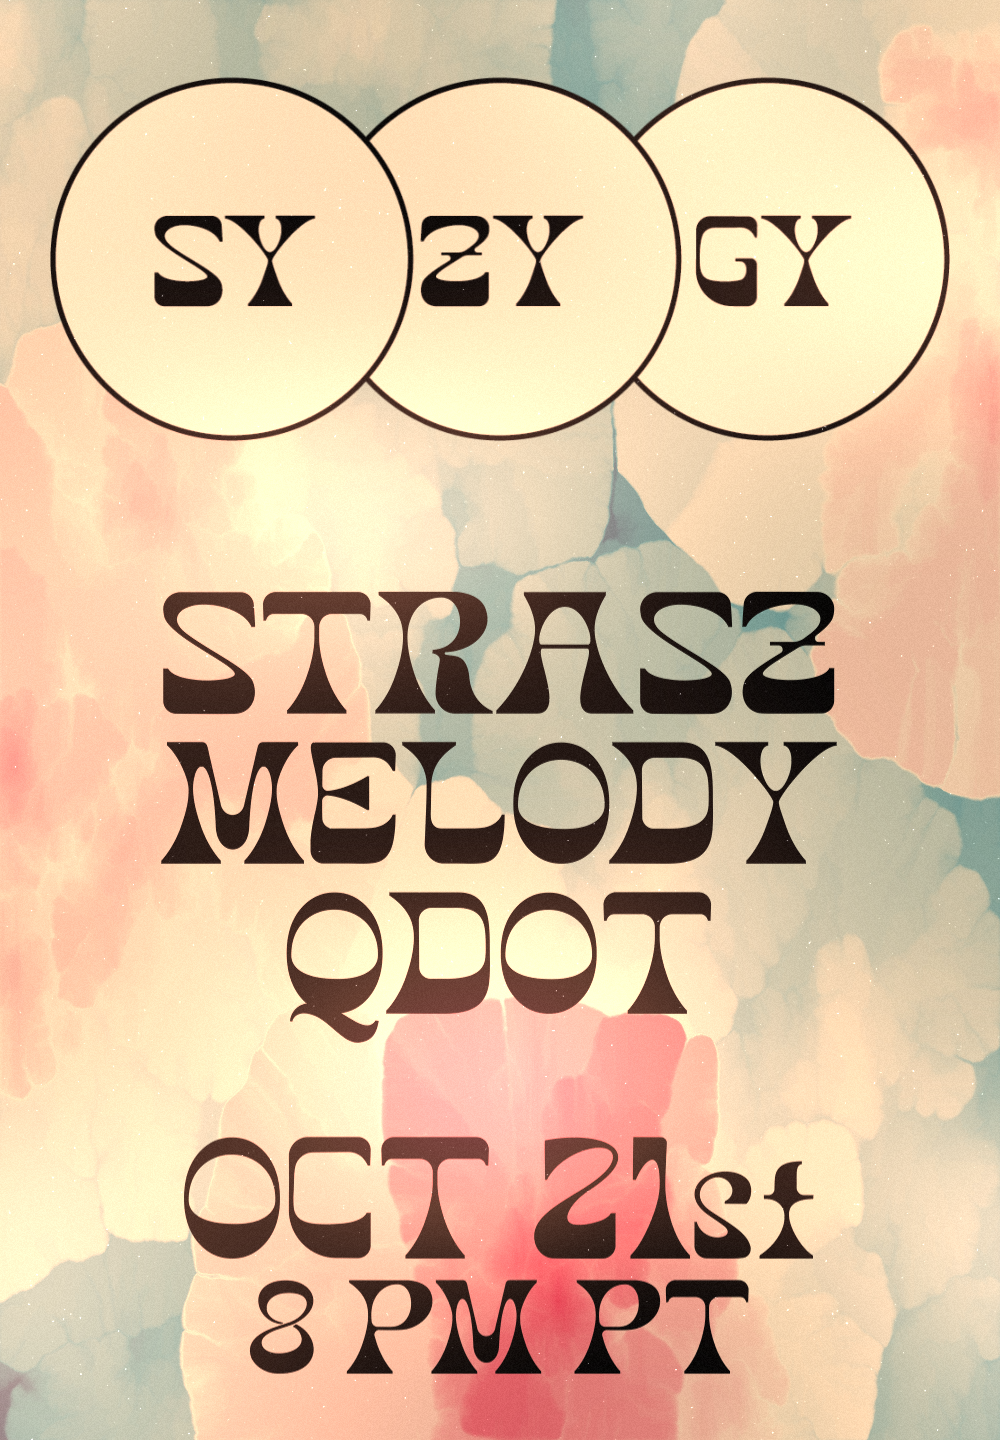 Flyer for Syzygy Ambient Night